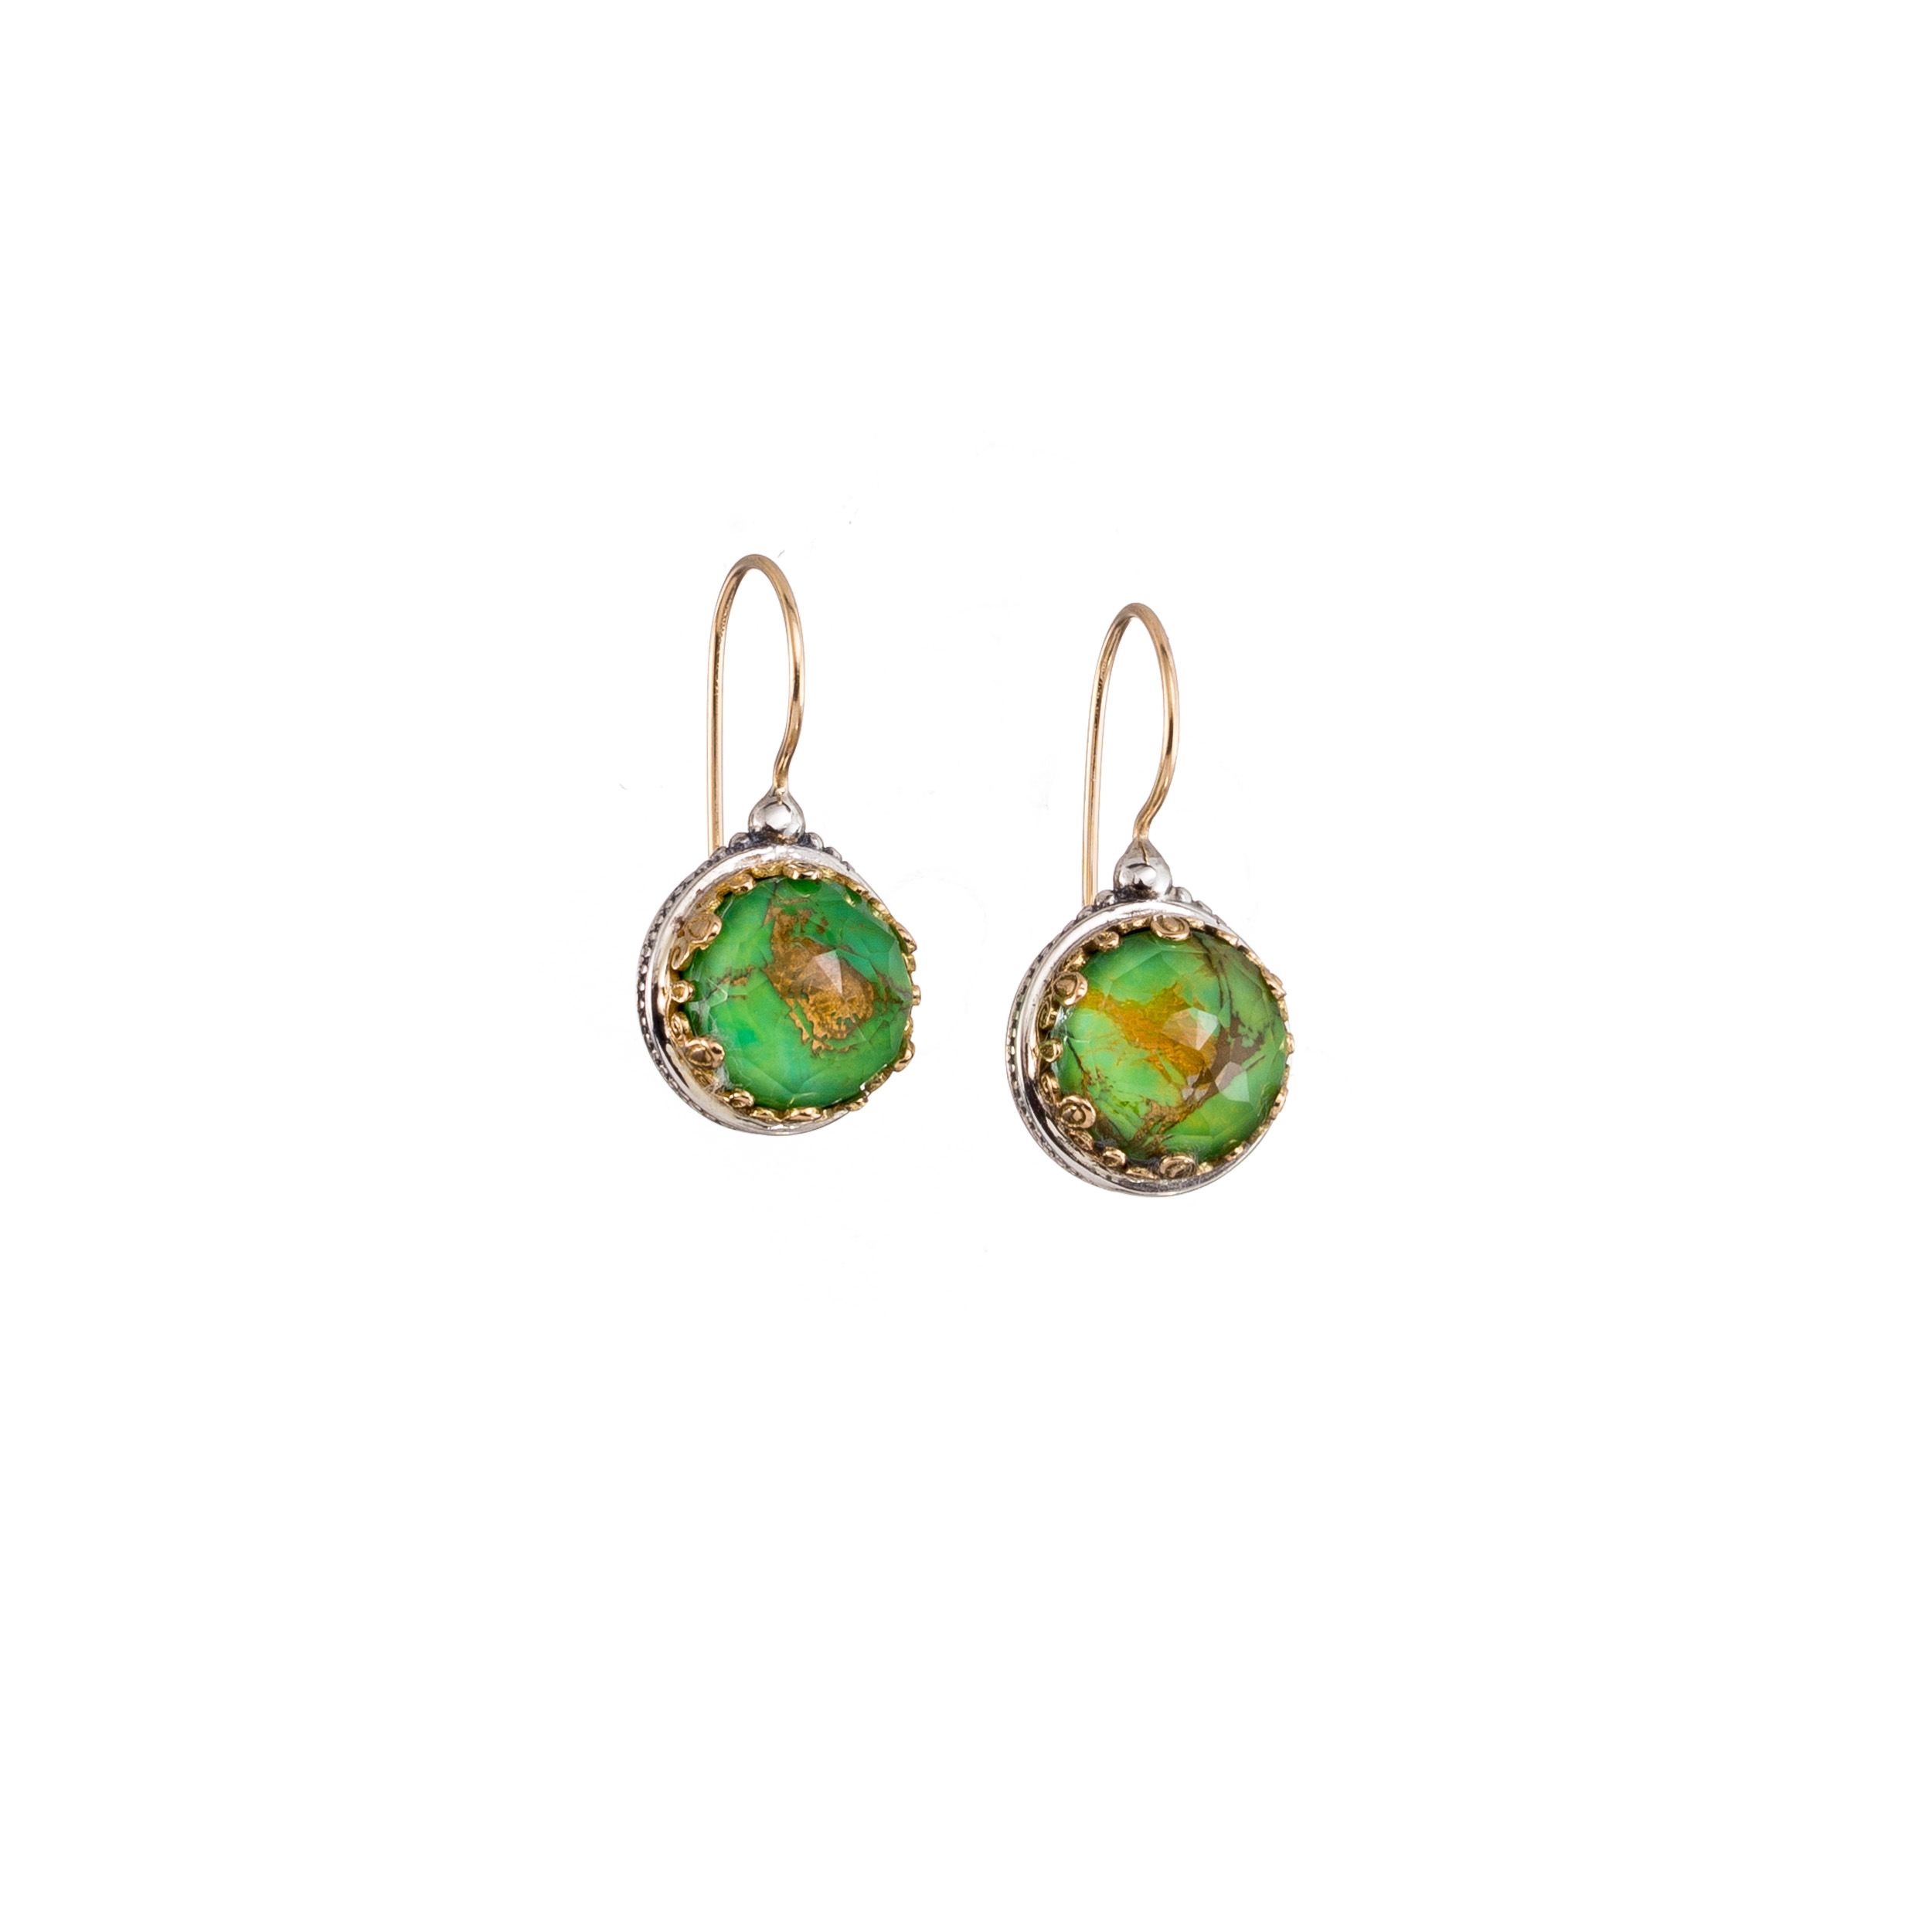 Aegean colors round earrings in 18K Gold and Sterling Silver with doublet stone